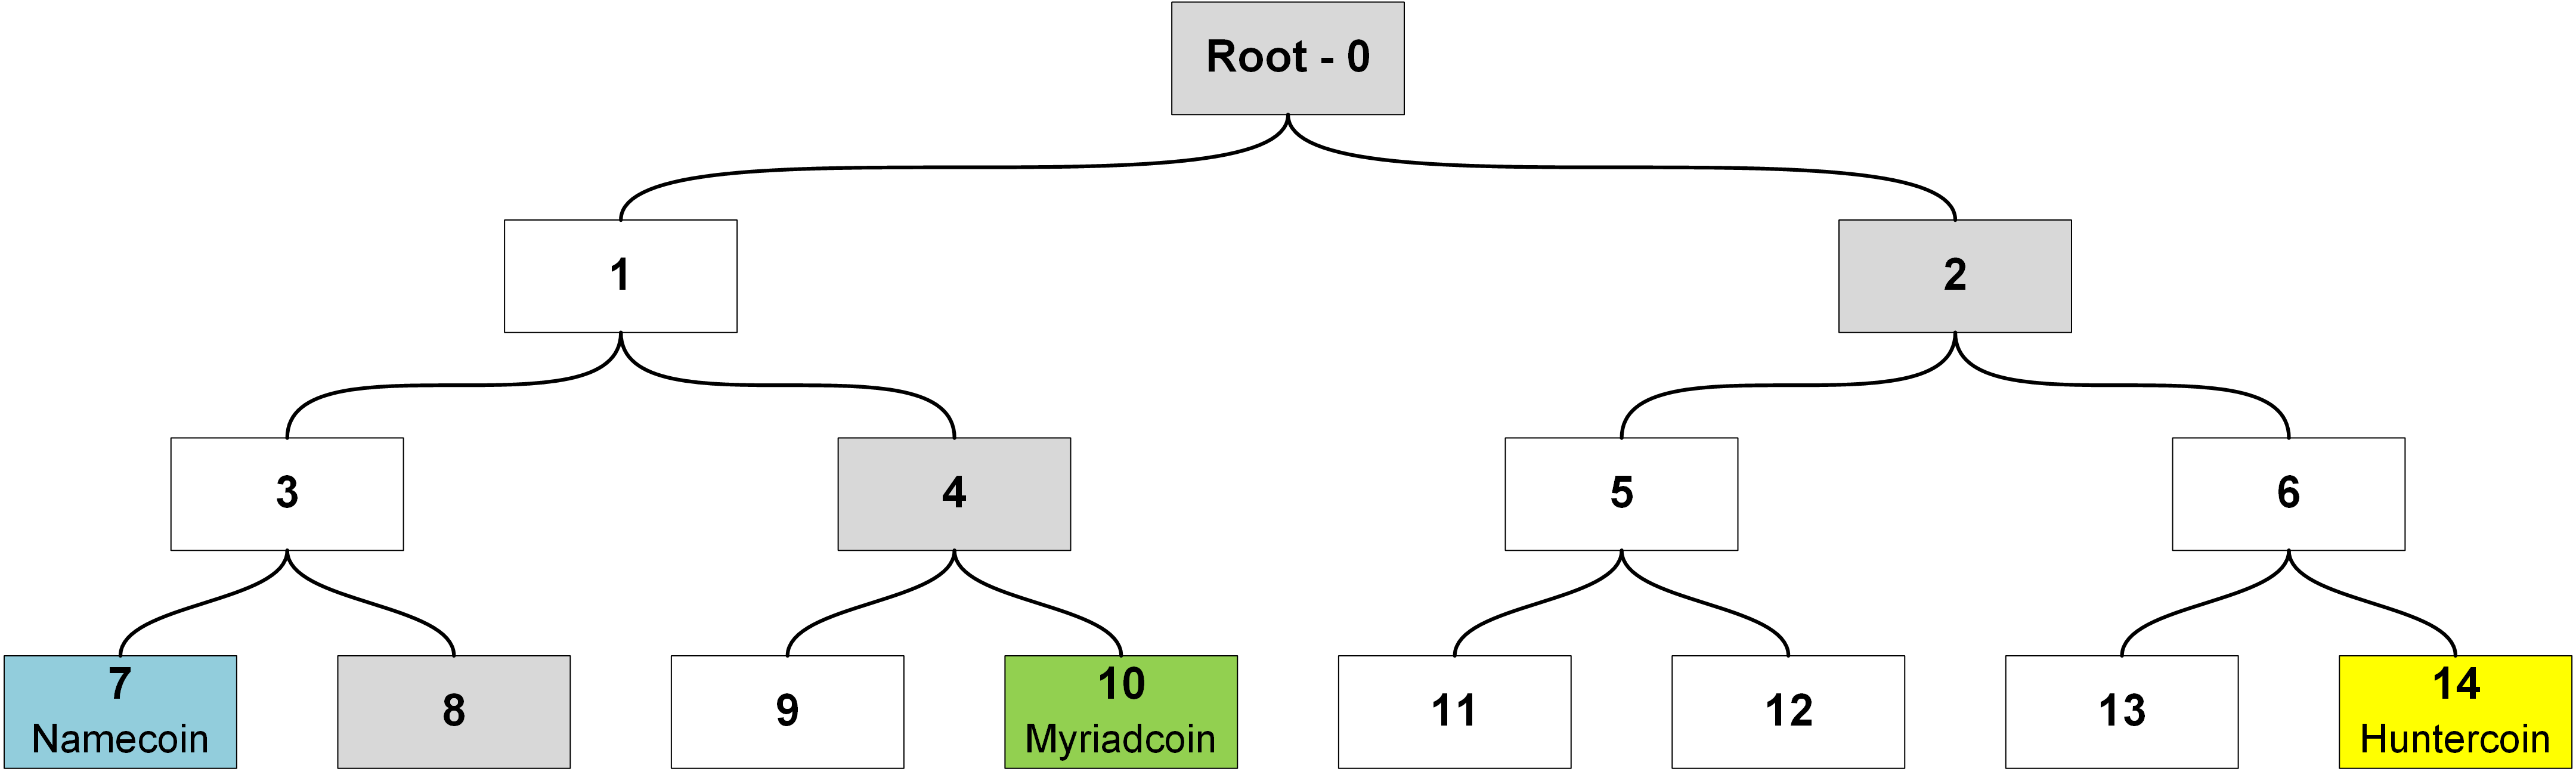 Visualization of a Merkle tree used when merge-mining multiple child cryptocurrencies in parallel. For Namecoin to be able to verify that the respective block hash is contained in the Merkle tree at position 7, hashes of the fields 8, 4 and 2 (colored in grey) must be provided in addition to the root hash (0). Furthermore, the order in which to apply the given hashes (in our case “right”, “right”, “right”) must be included.